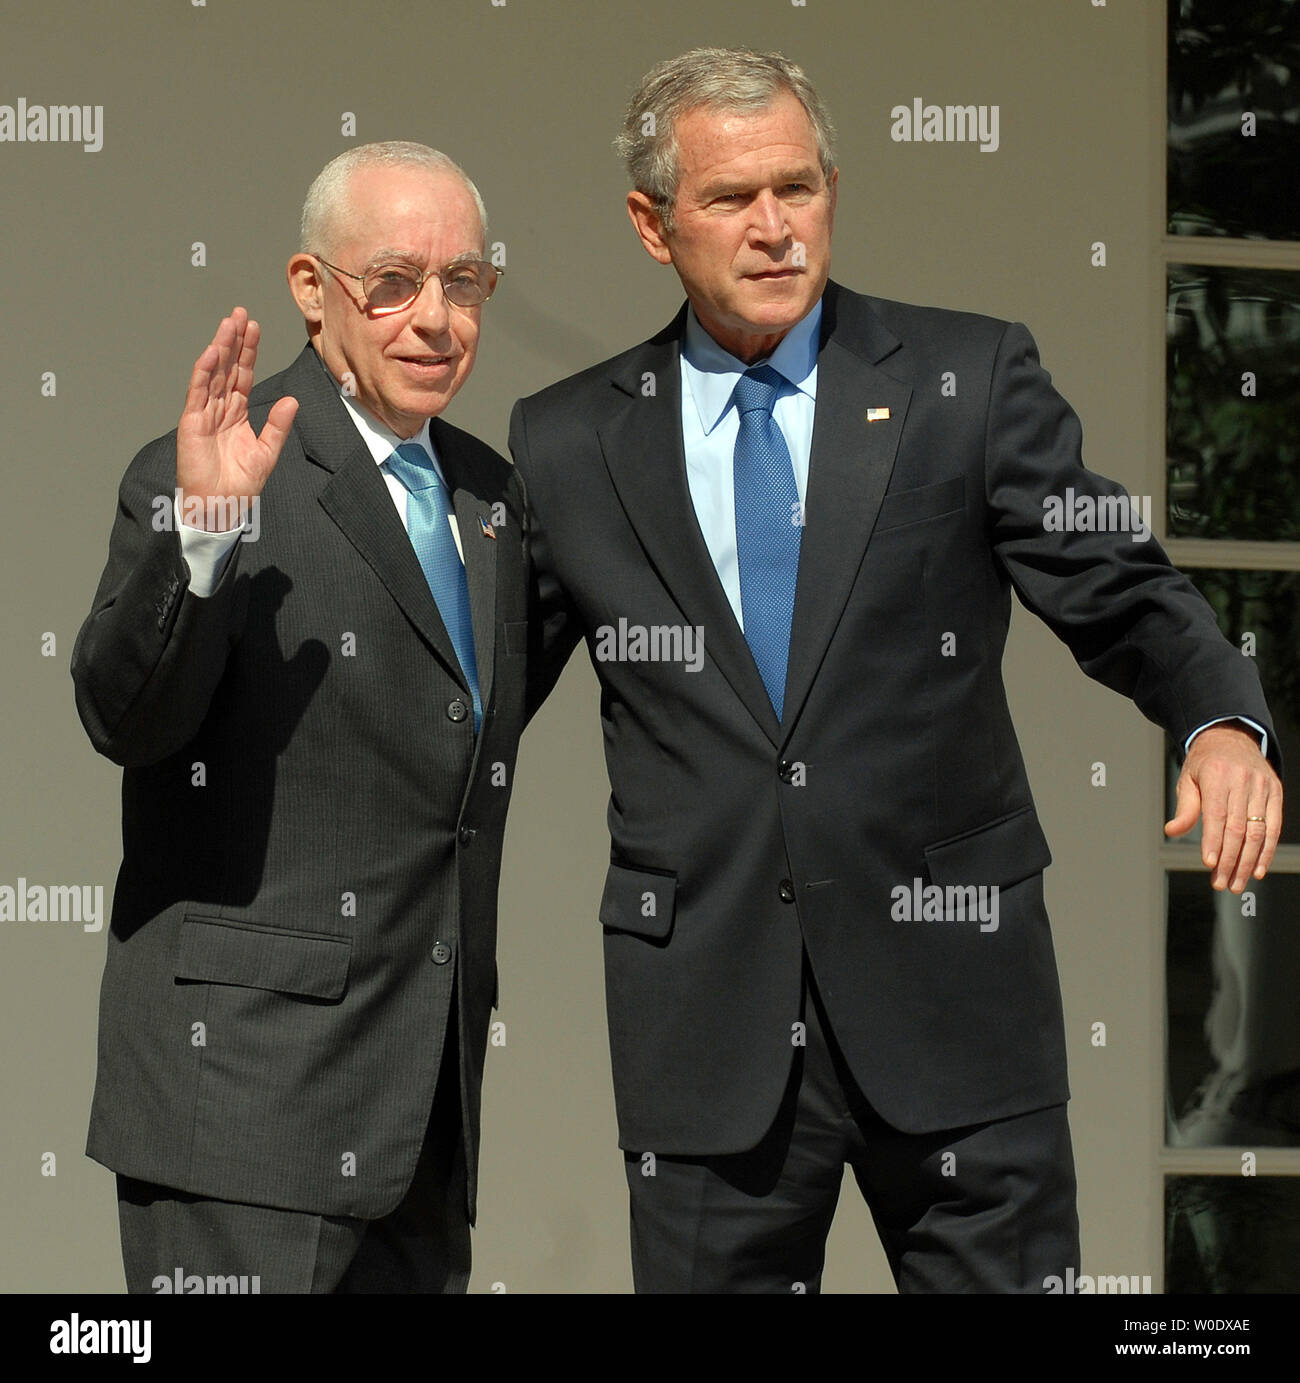 Michael B. Mukasey, a retired federal judge from New York, (L) and U.S. President George W. Bush depart after Bush announced his nomination of Mukasey to replace Alberto Gonzales as attorney general in the Rose Garden of the White House on September 17, 2007.   (UPI Photo/Roger L. Wollenberg) Stock Photo